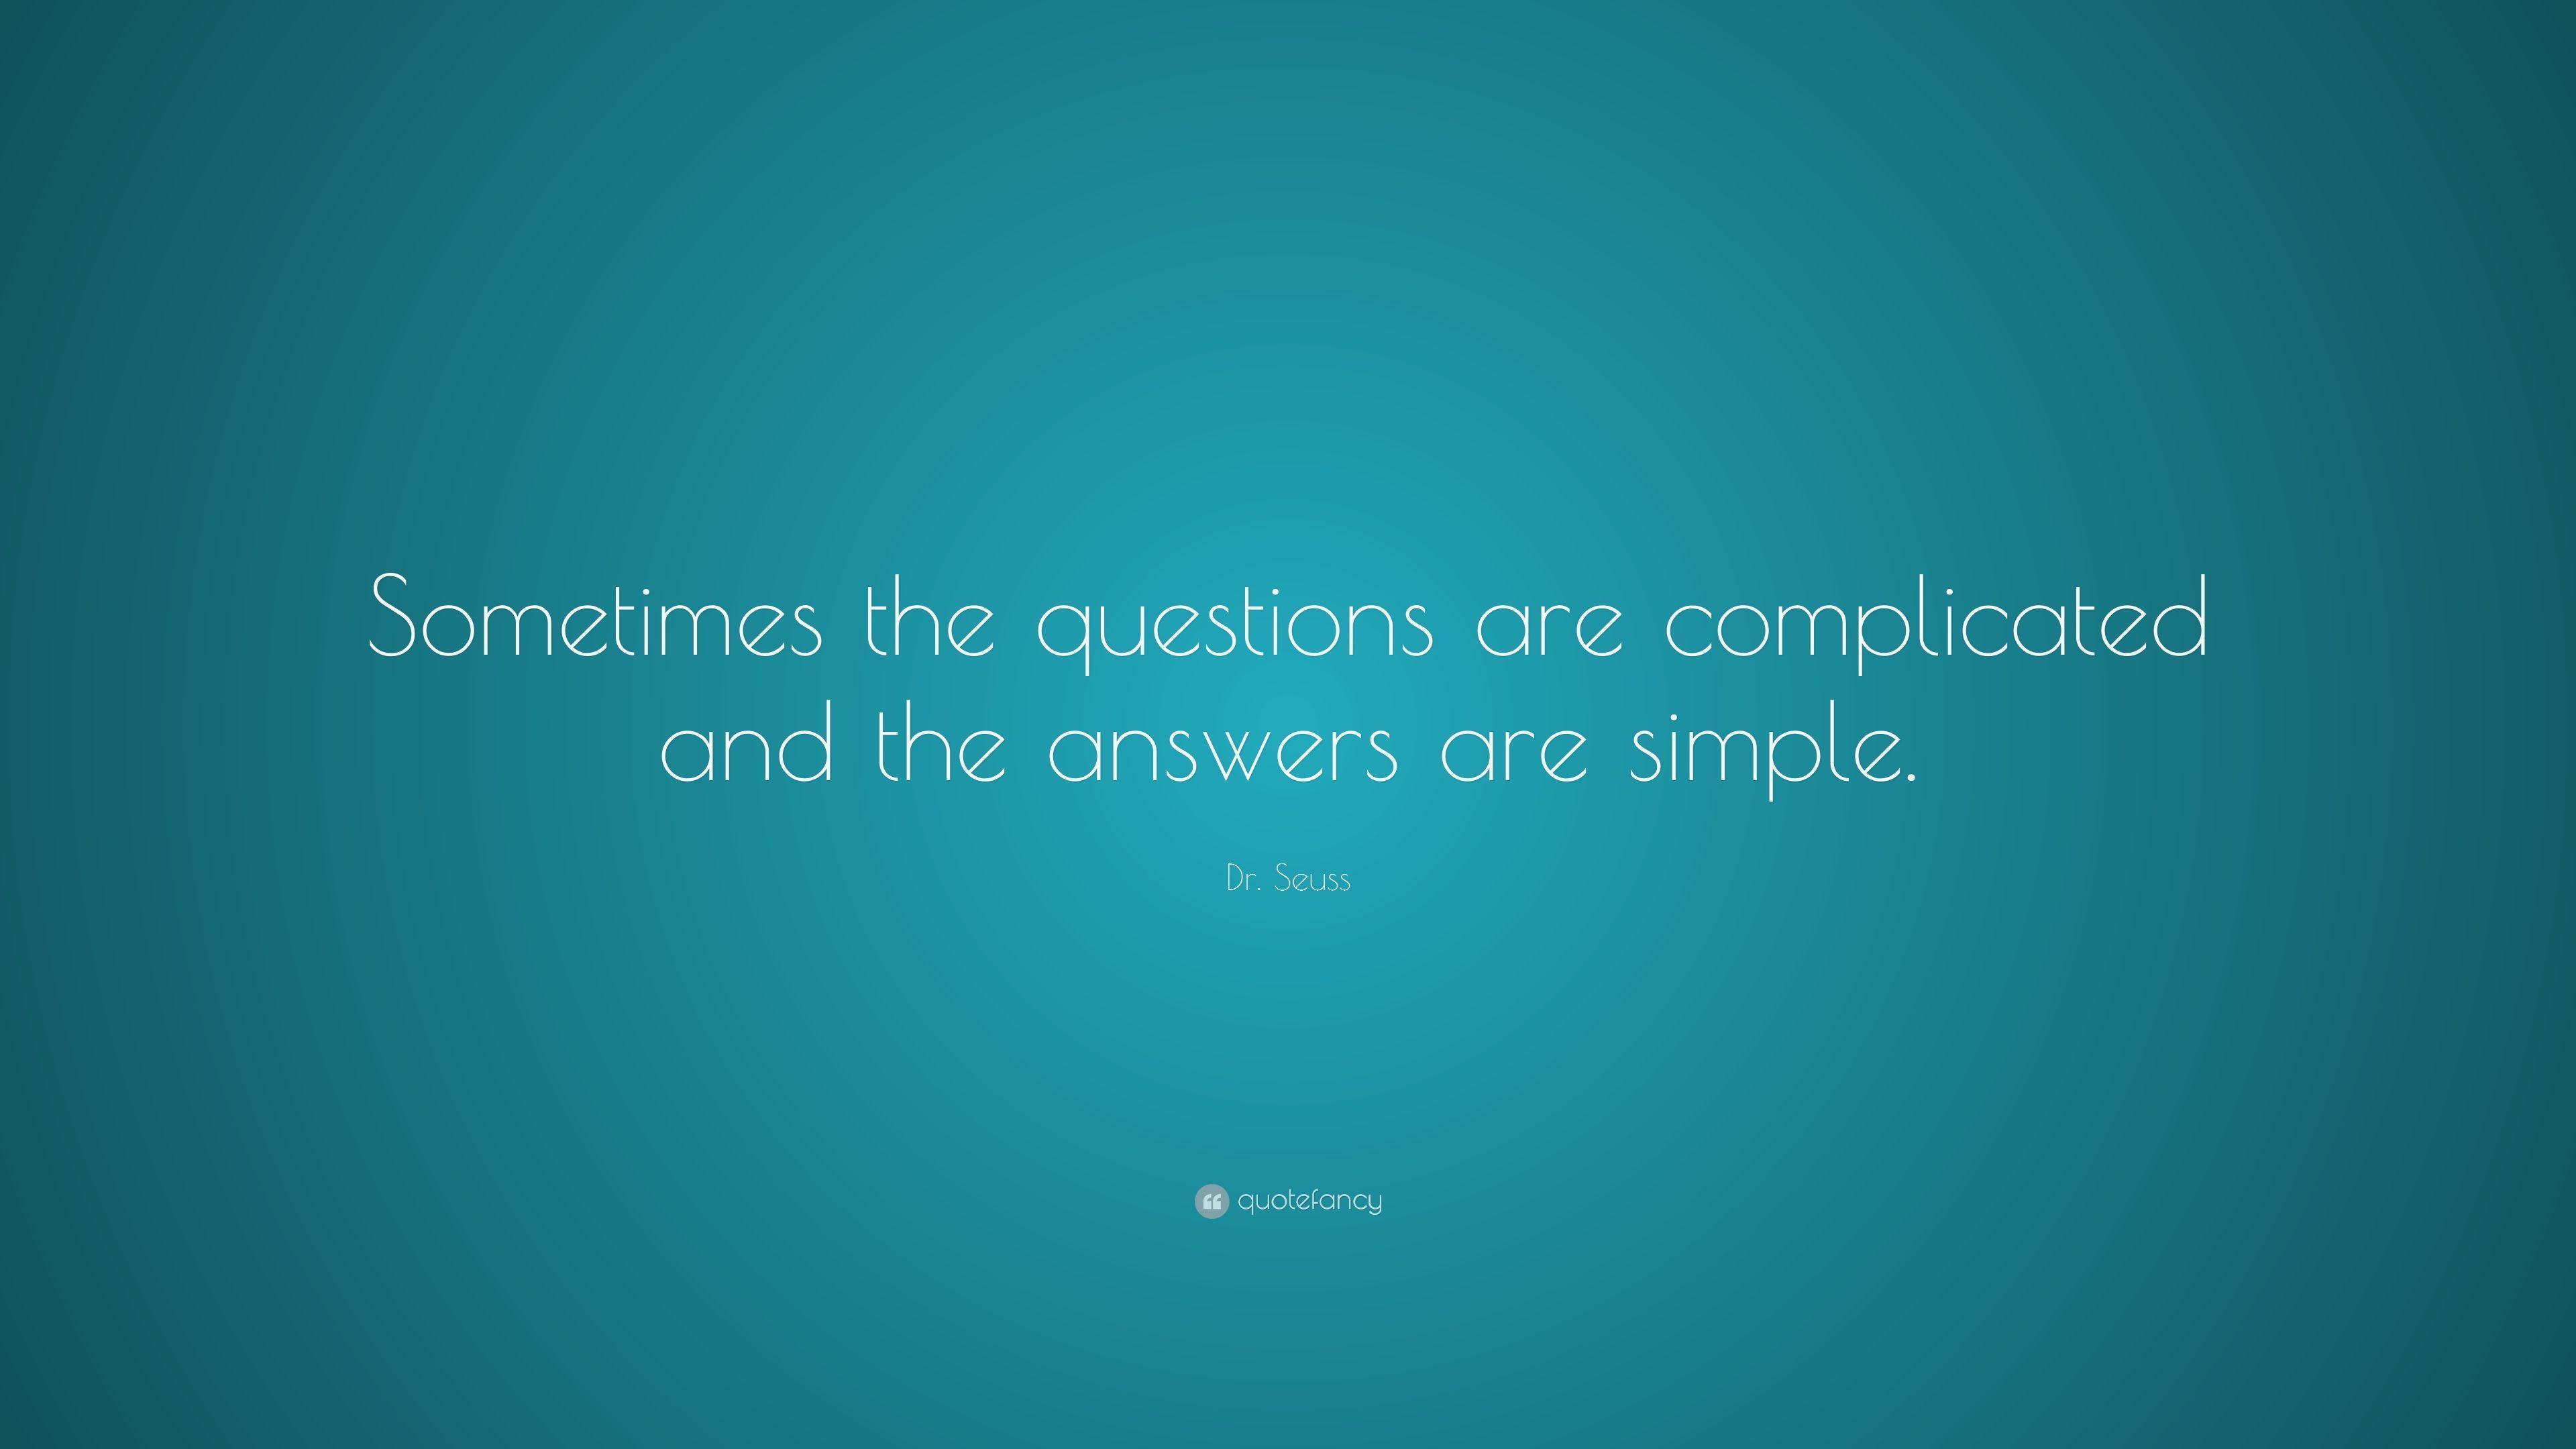 Dr. Seuss Quote: “Sometimes the questions are complicated and